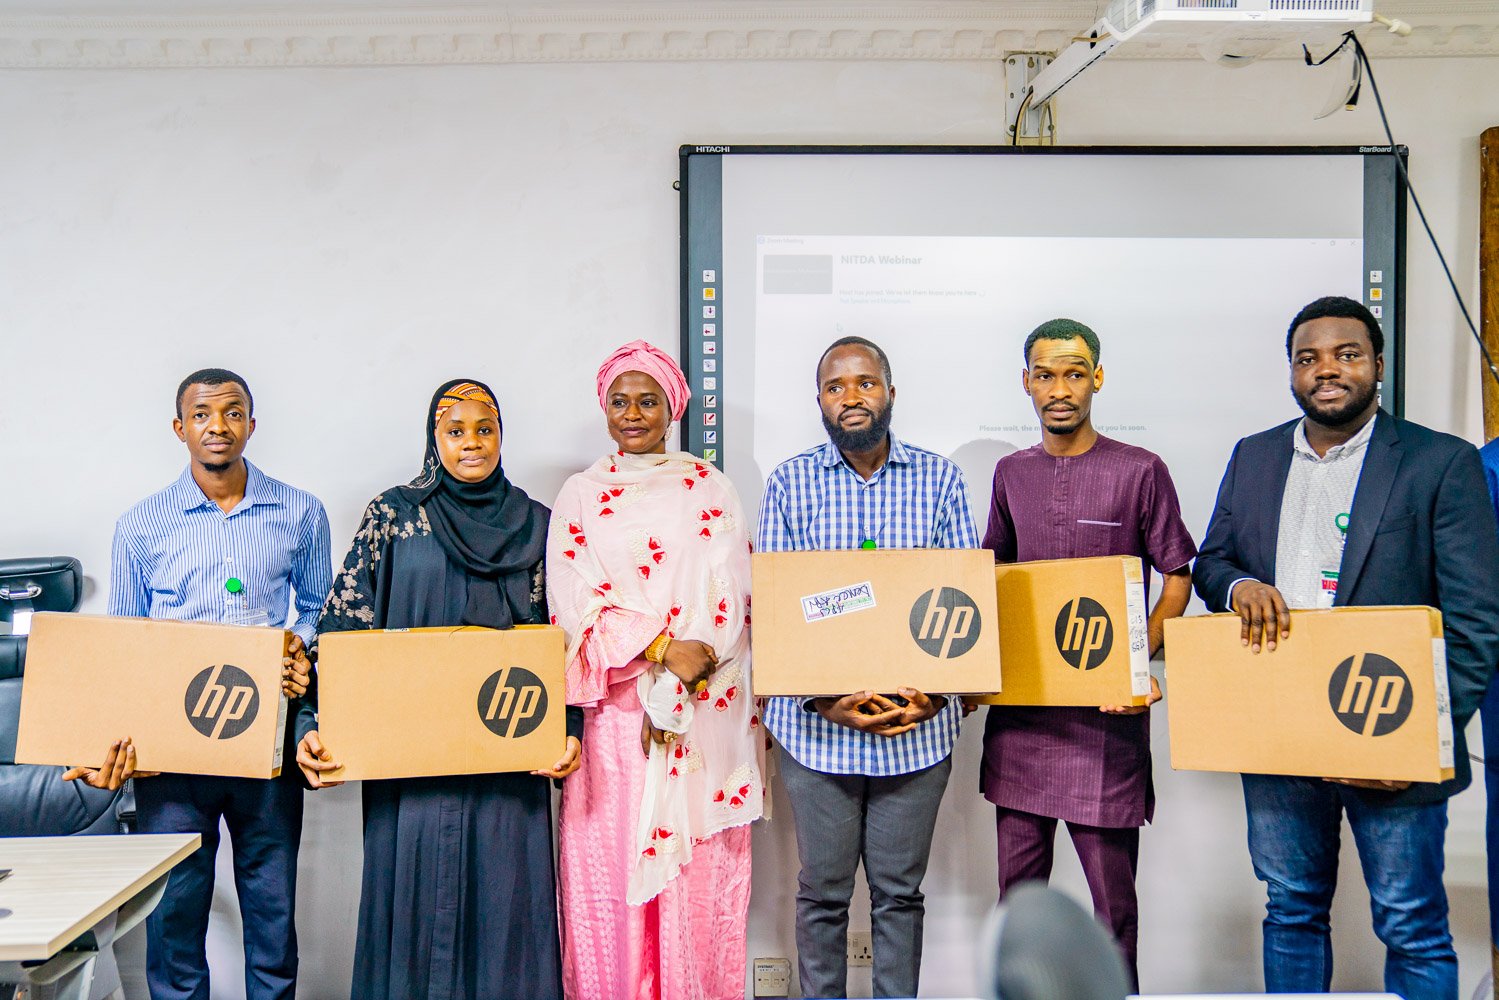 Nitda Cohort 2 : Nitd Award 10 Laptops To Outstanding Learners Of It'S Cohort 2